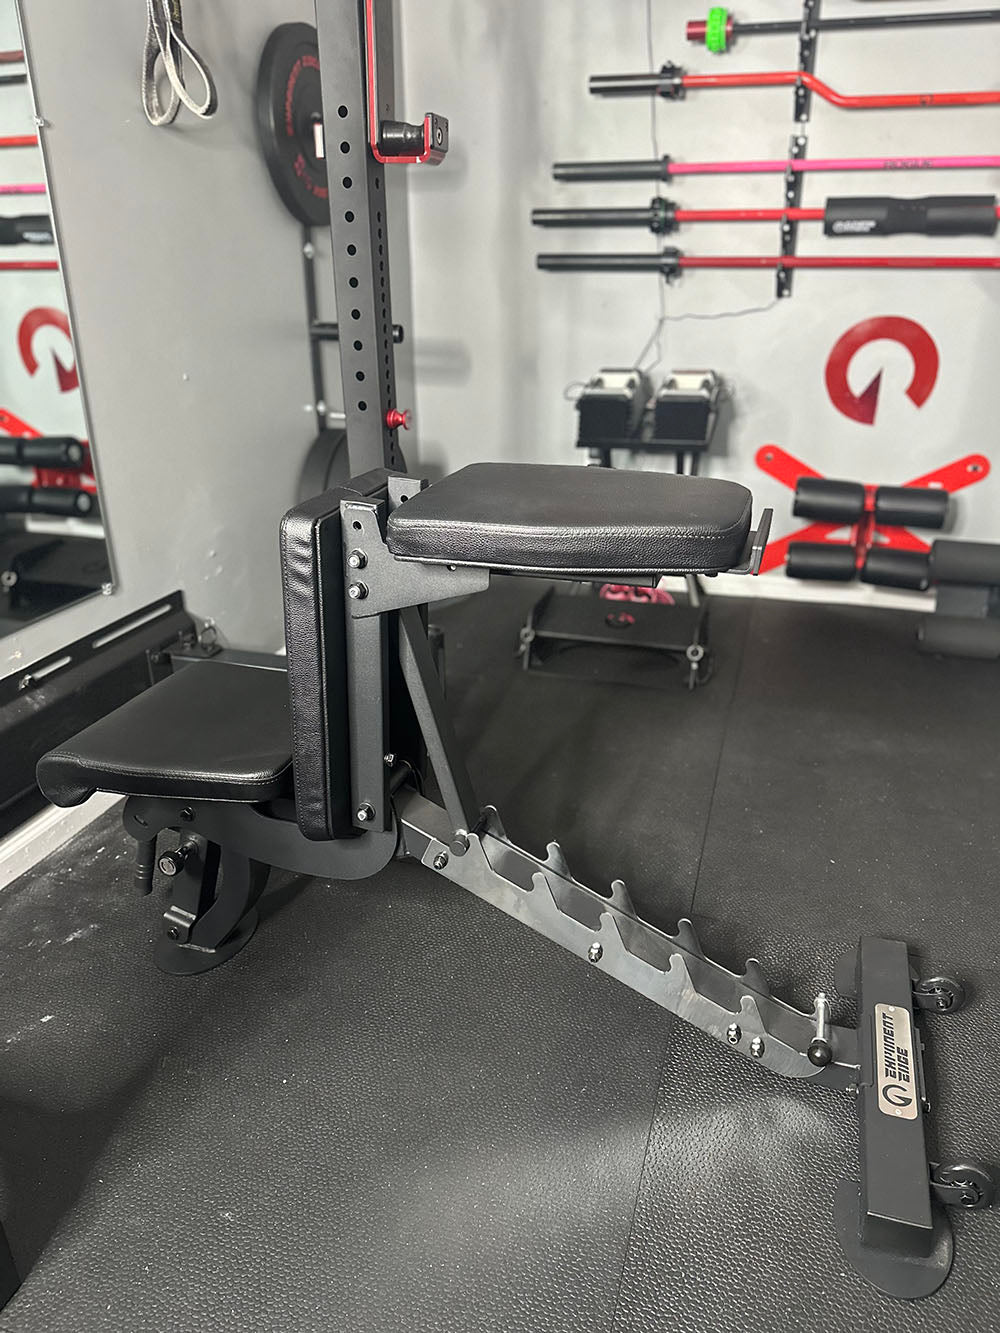 The Edge Infinity Bench is a bench that combines three separate benches all into one bench. You get the benefits of a flat bench, incline bench, and half bench all in one device. This image presents the bench from a side view with the head support adjusted to create space for behind the head workouts.